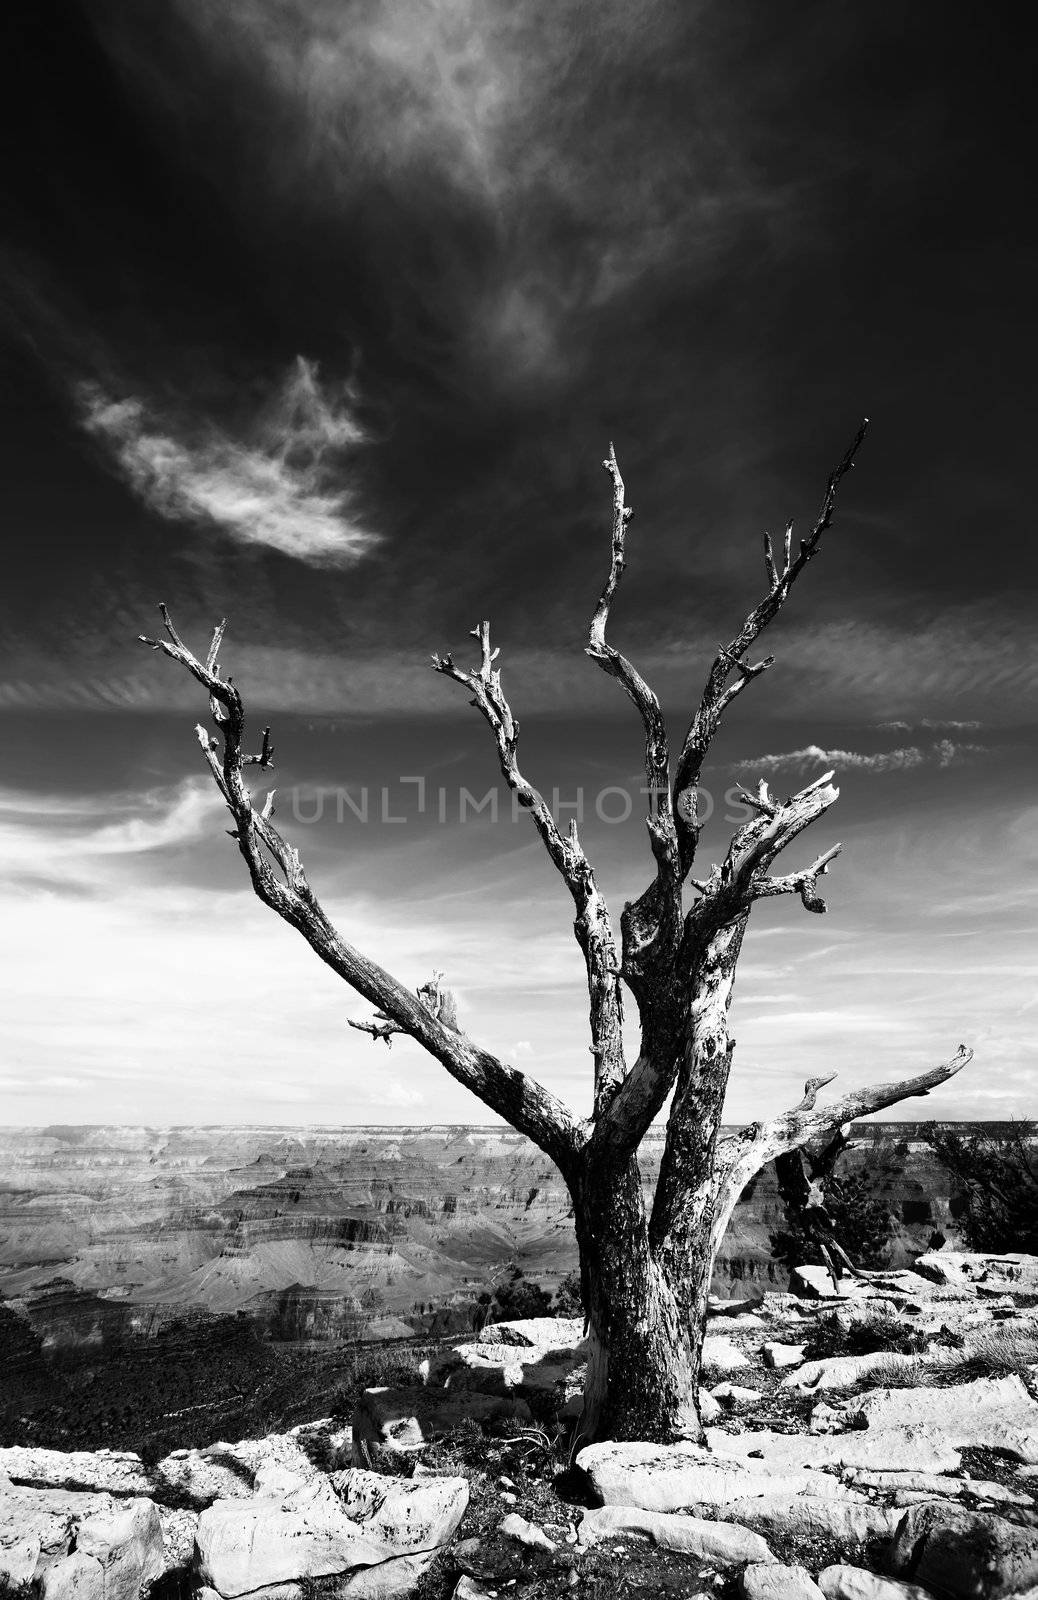 Dead tree on south rim of Grand Canyon